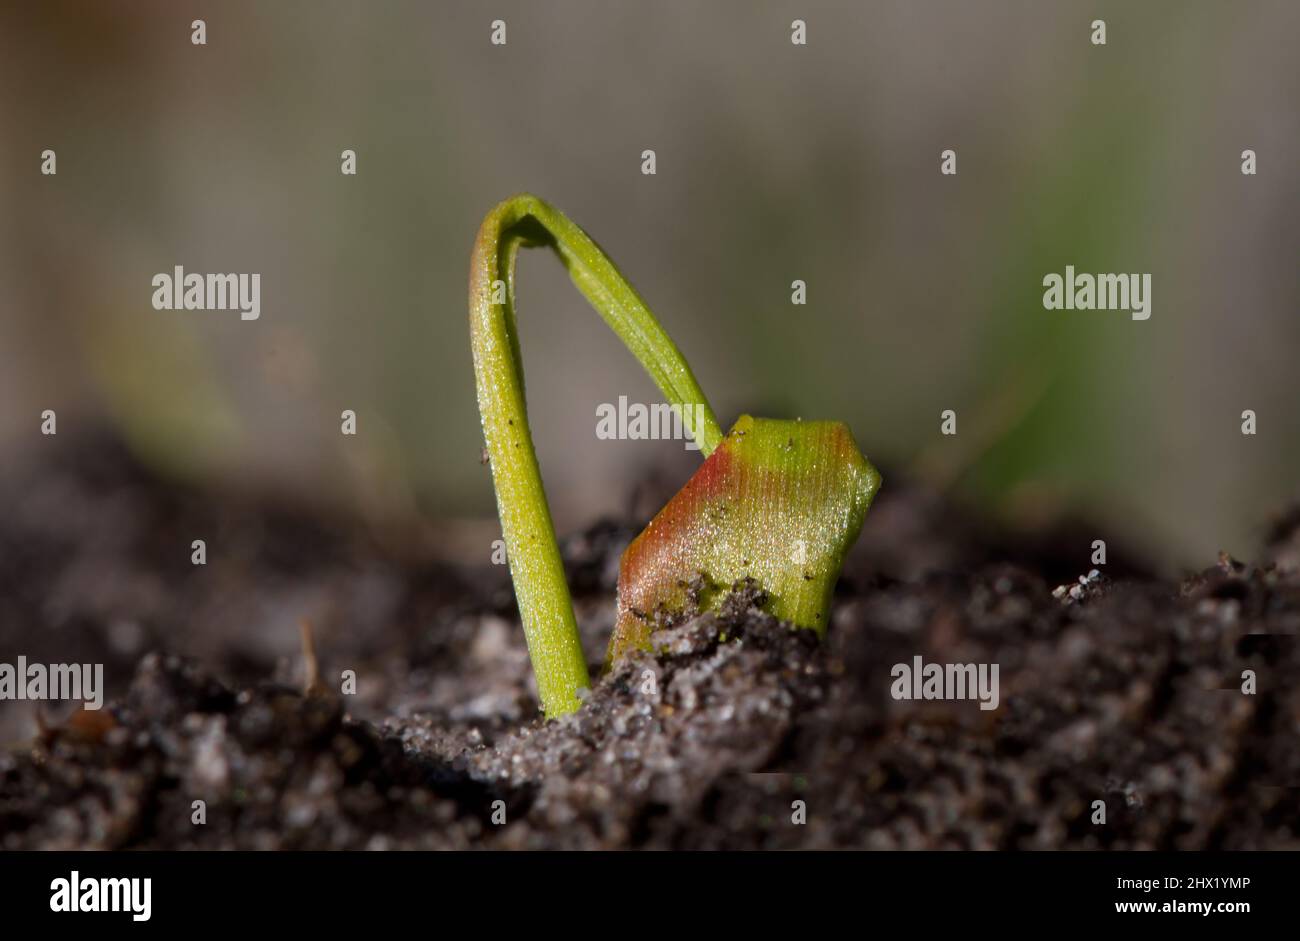 Close-up of a small, delicate seedling emerging from earth Stock Photo